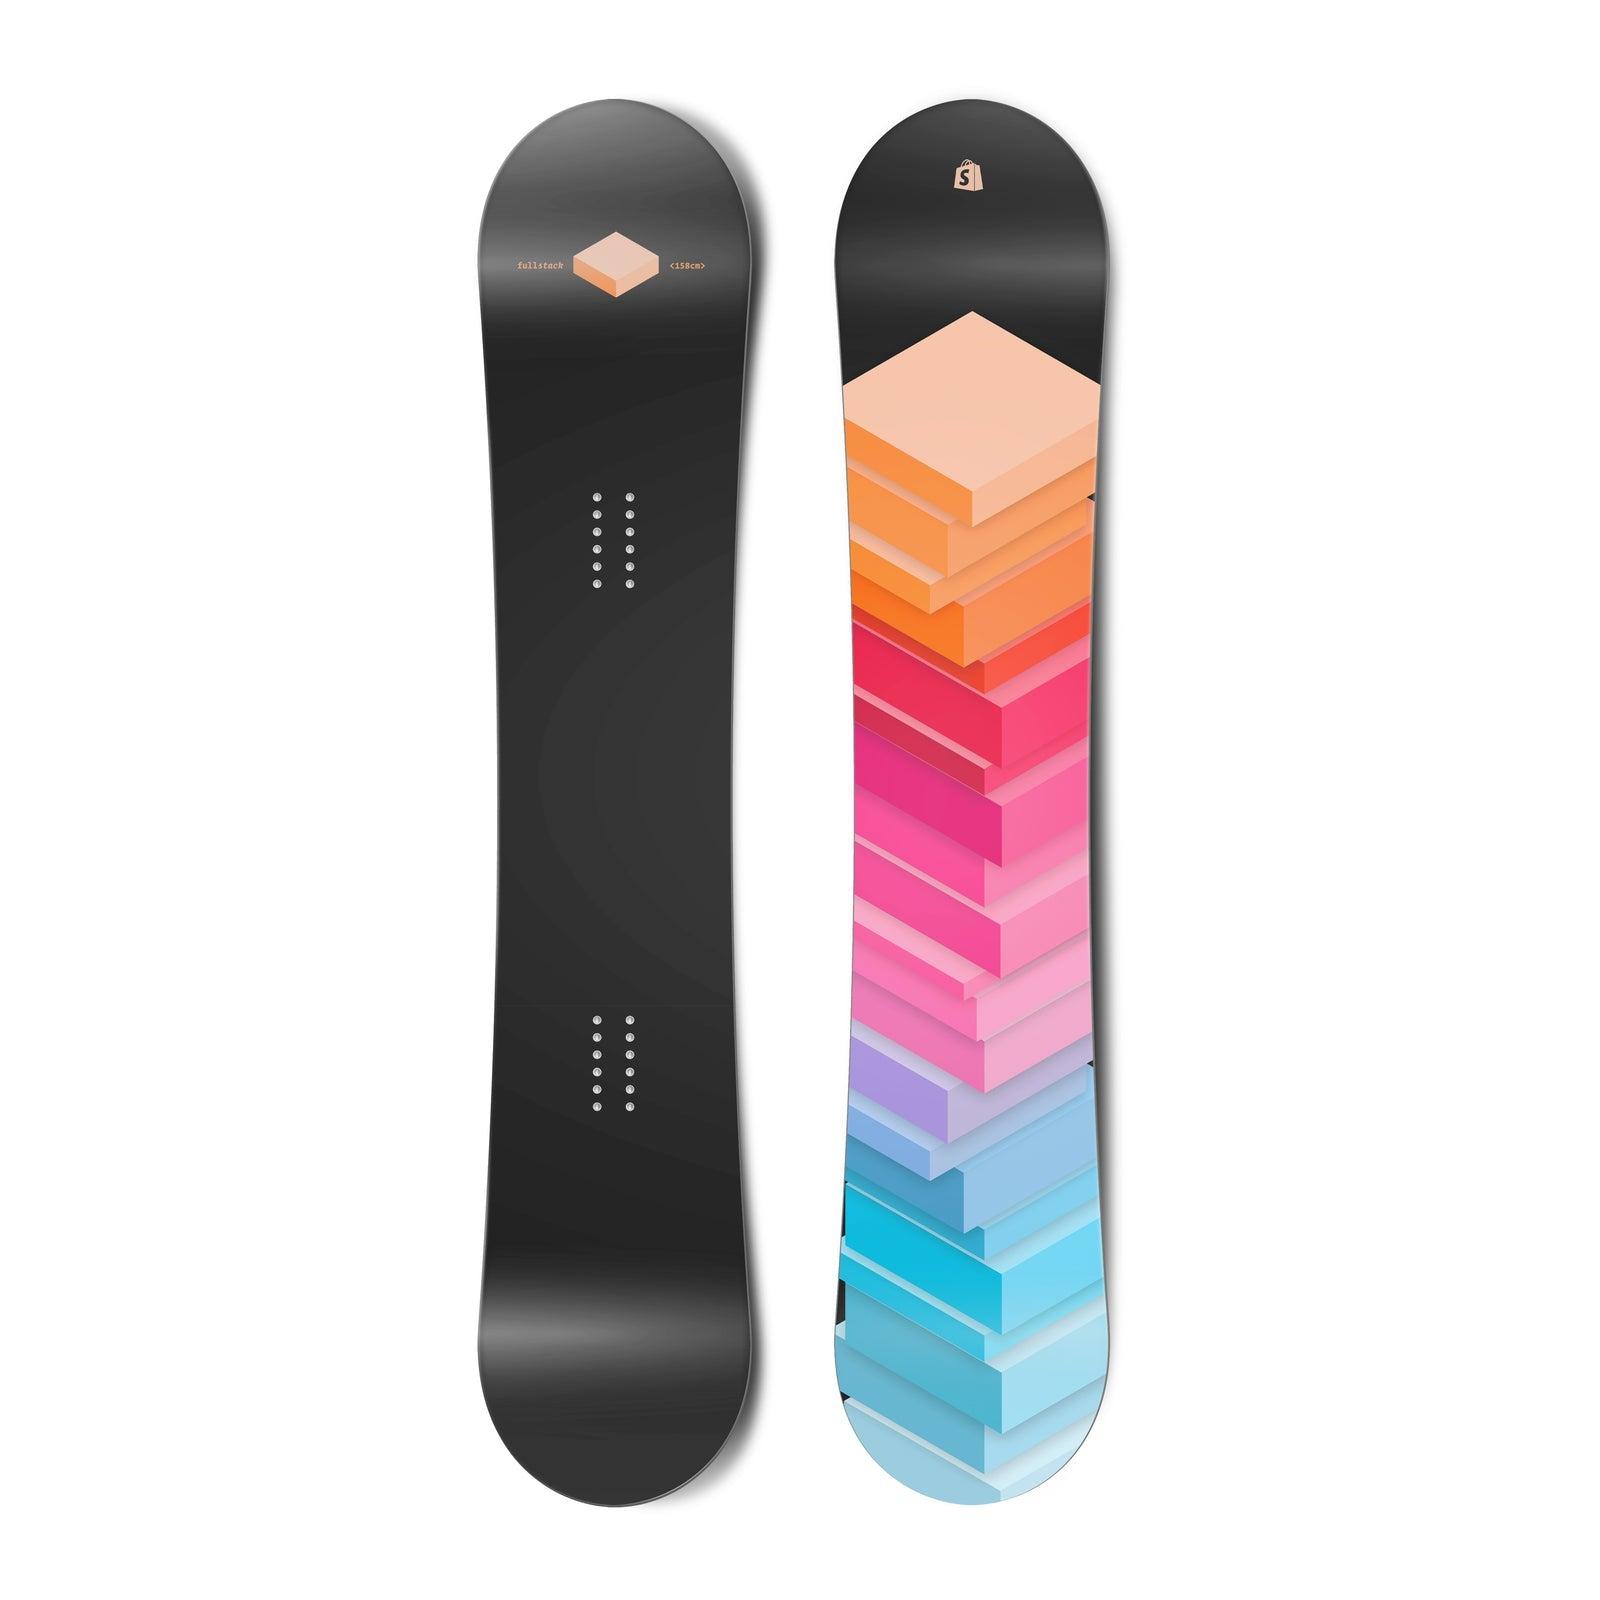 The top view and bottom view of a snowboard. The top view is black with a singular peach cube.
          The bottom view has a graphic of a stack of blocks in a gradient from light blue, to pink to peach.